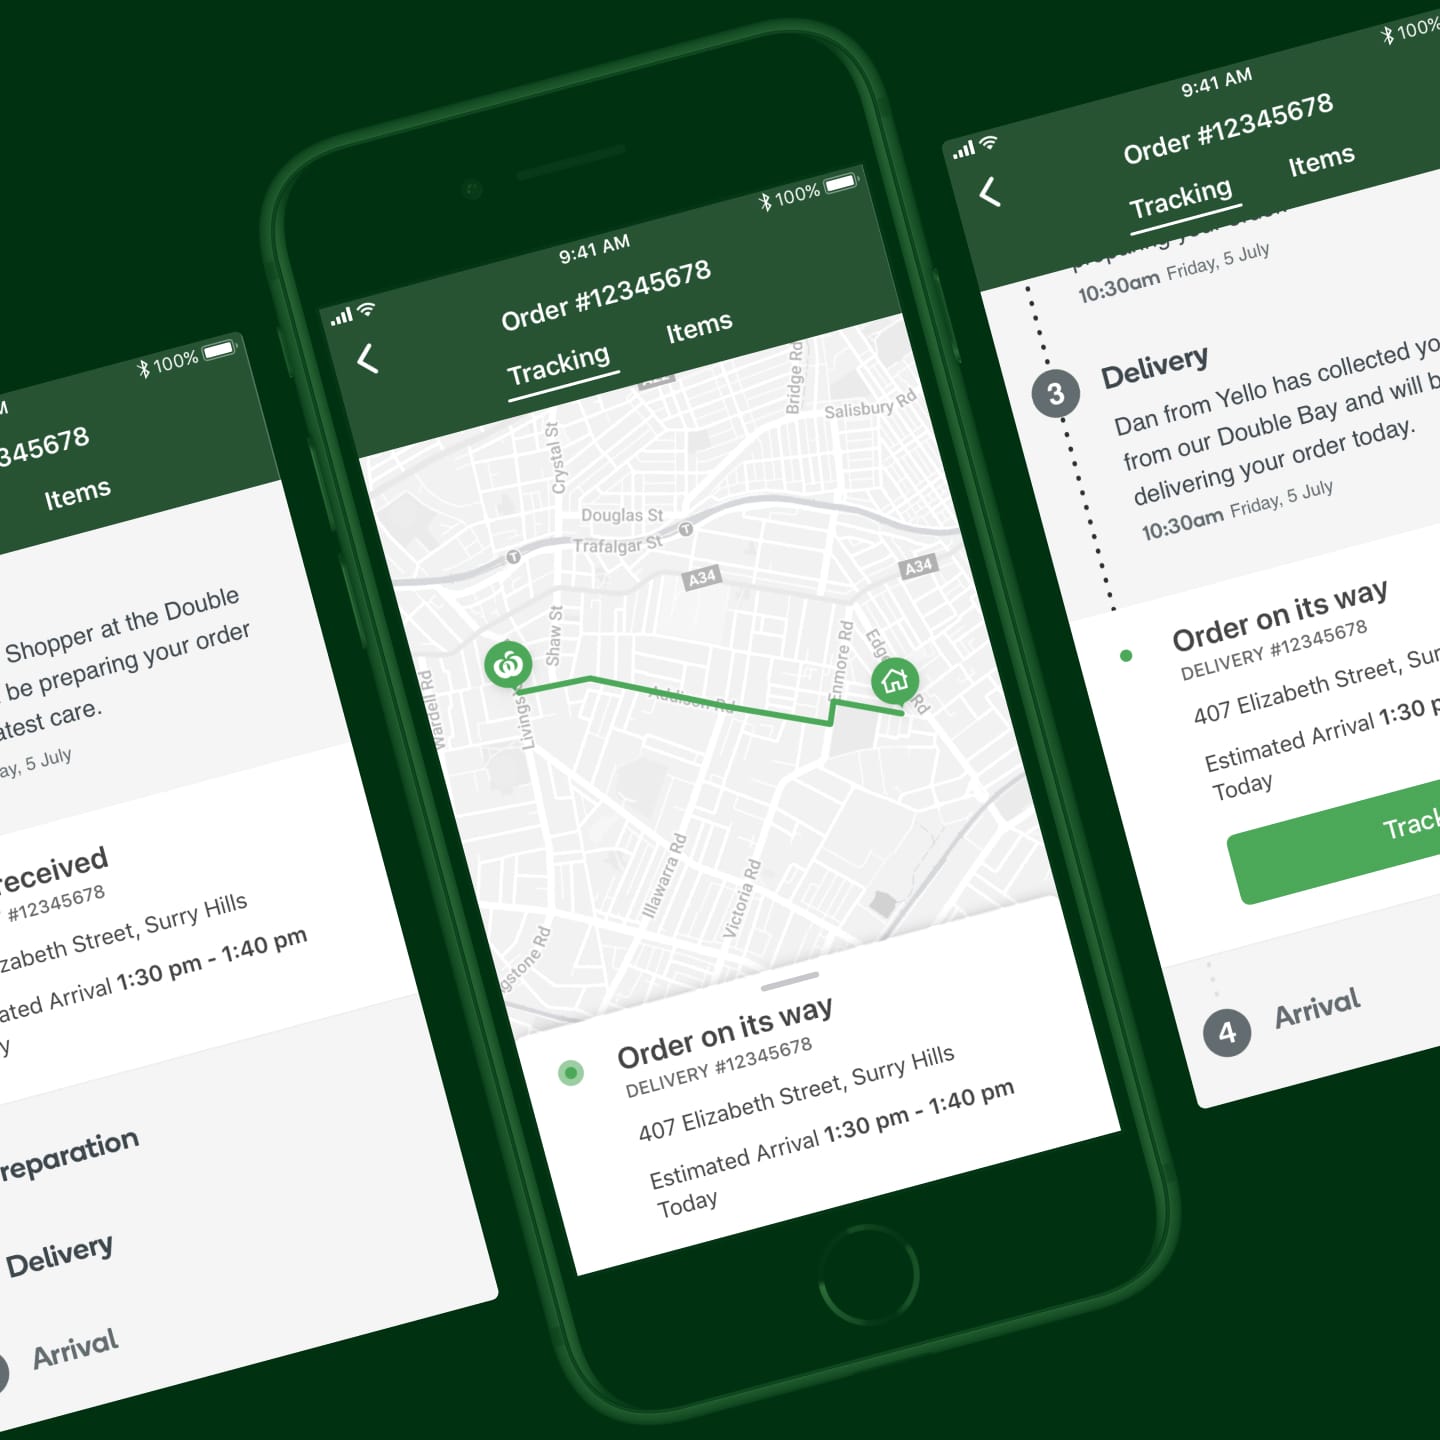 Concepts for real-time delivery tracking in the Woolies app